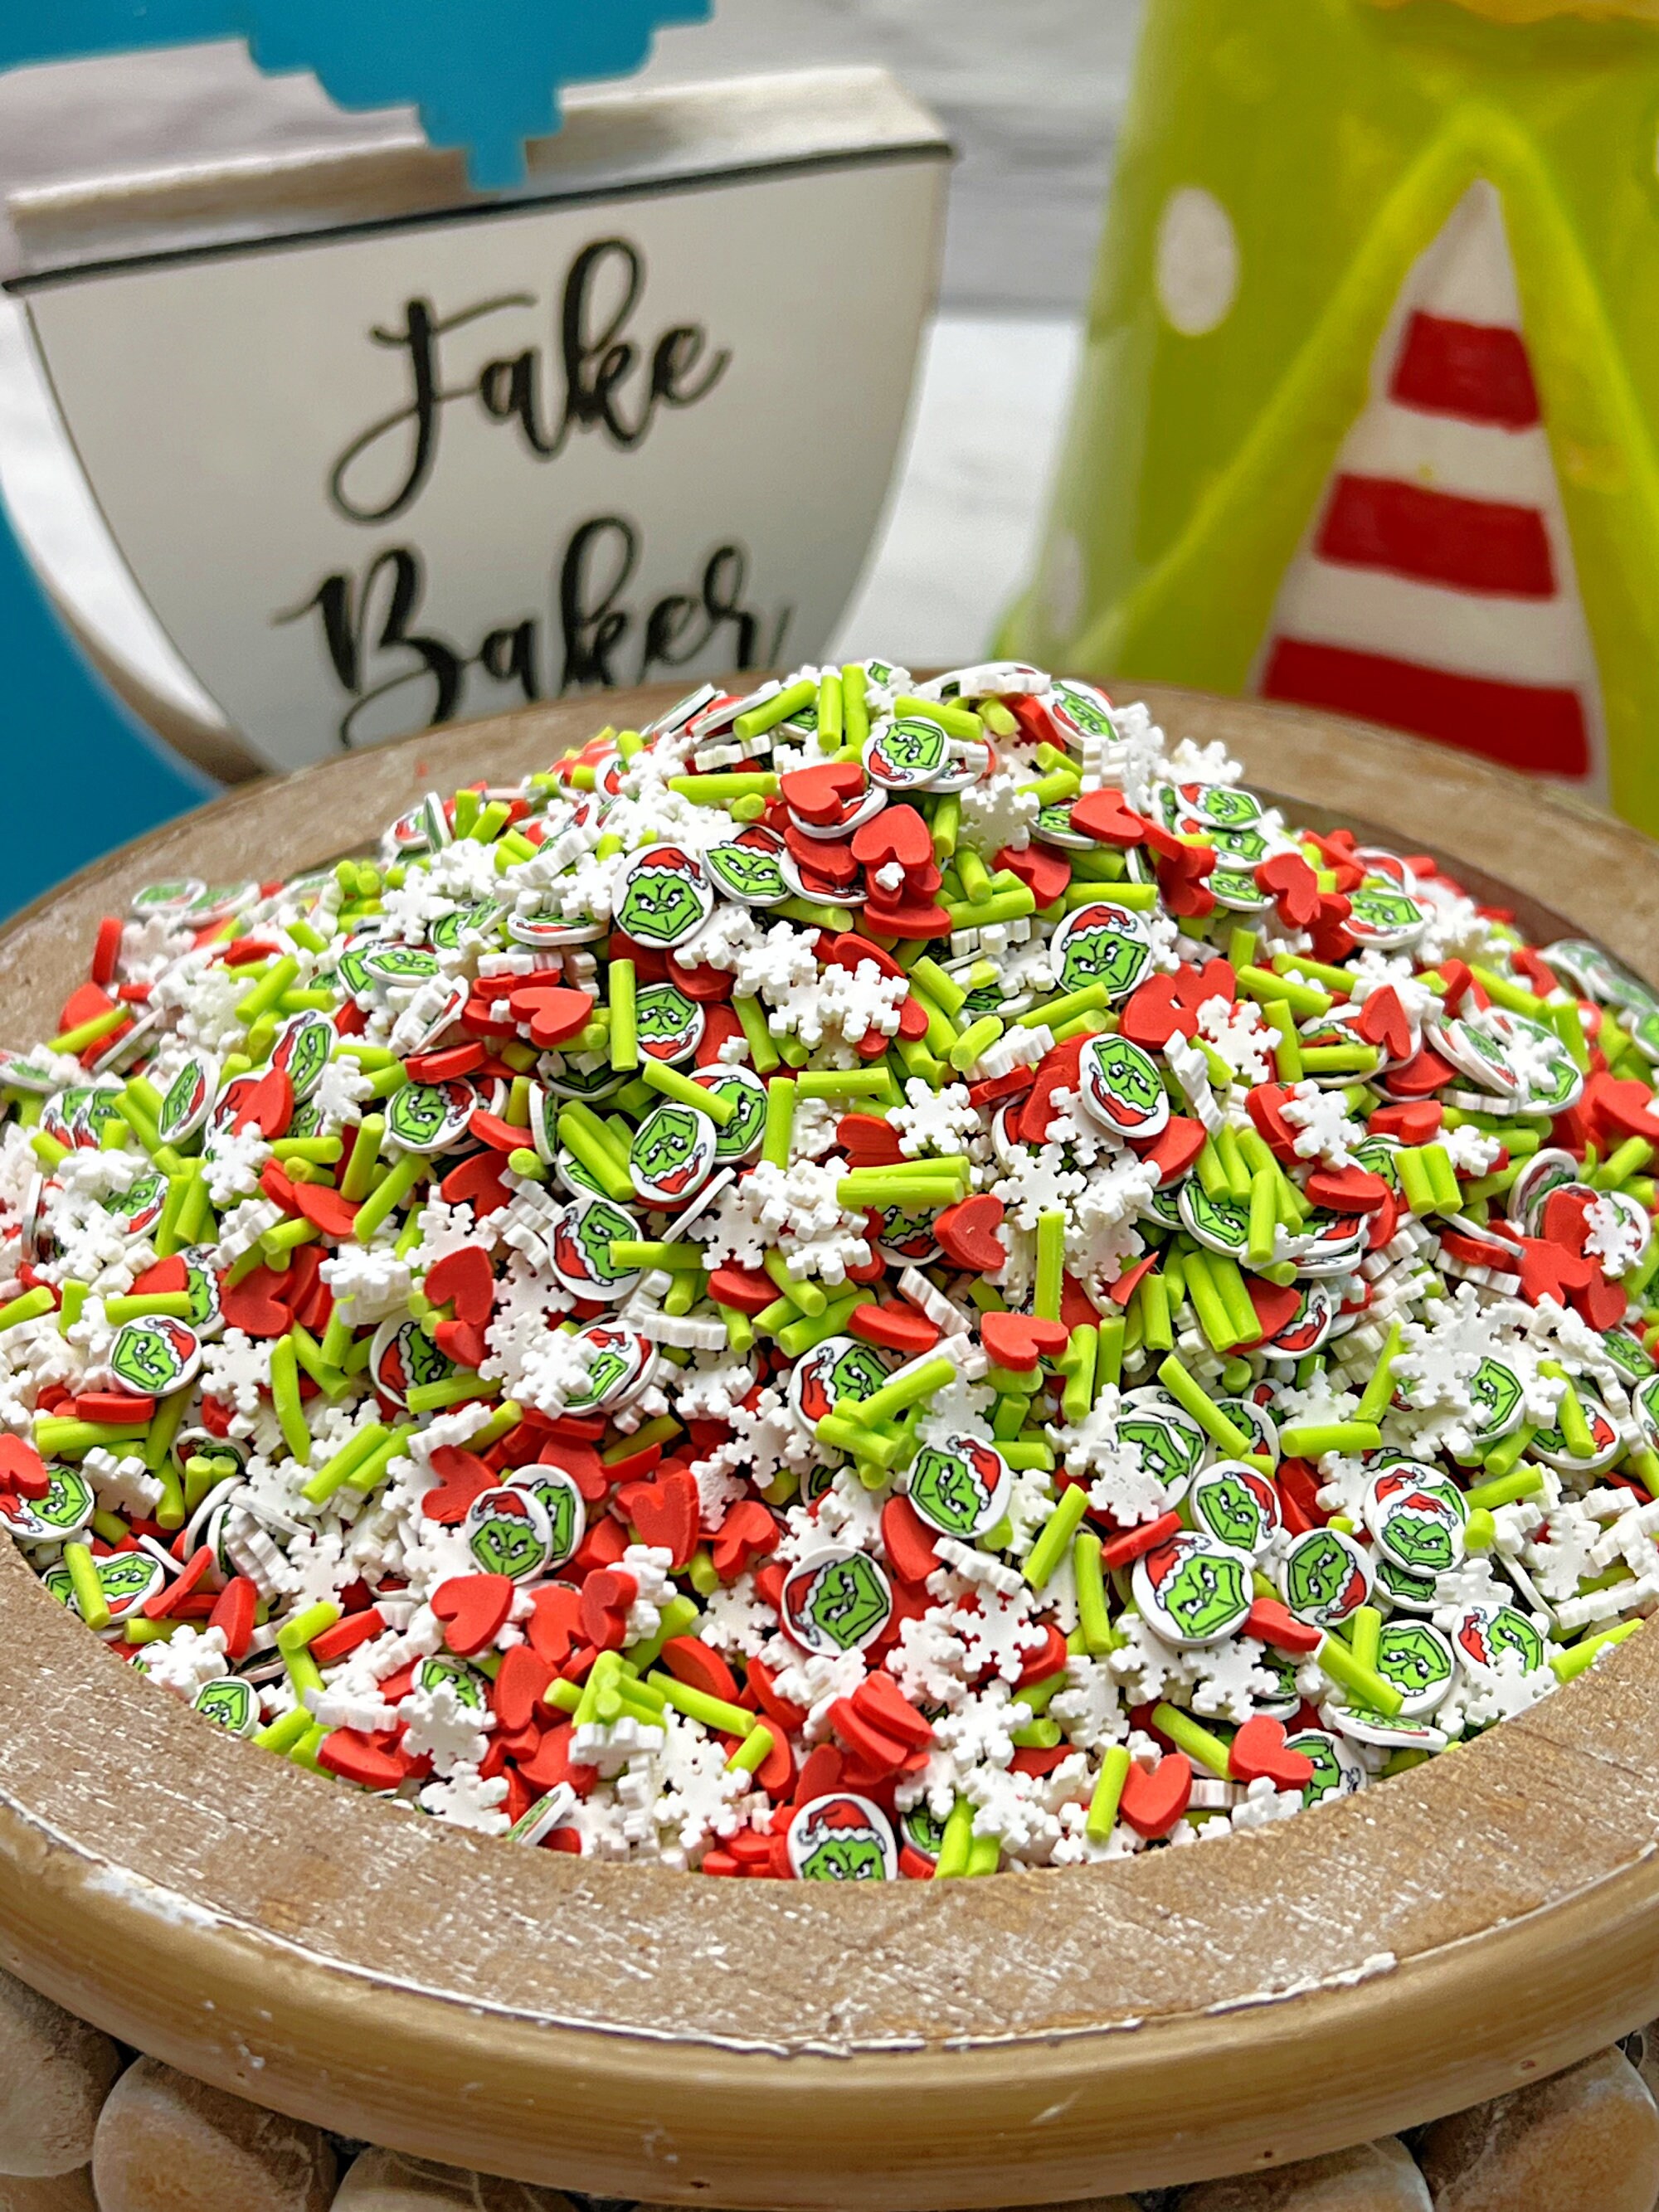 Christmas Green Red White Fake Sprinkles Holiday Decoden Jimmies